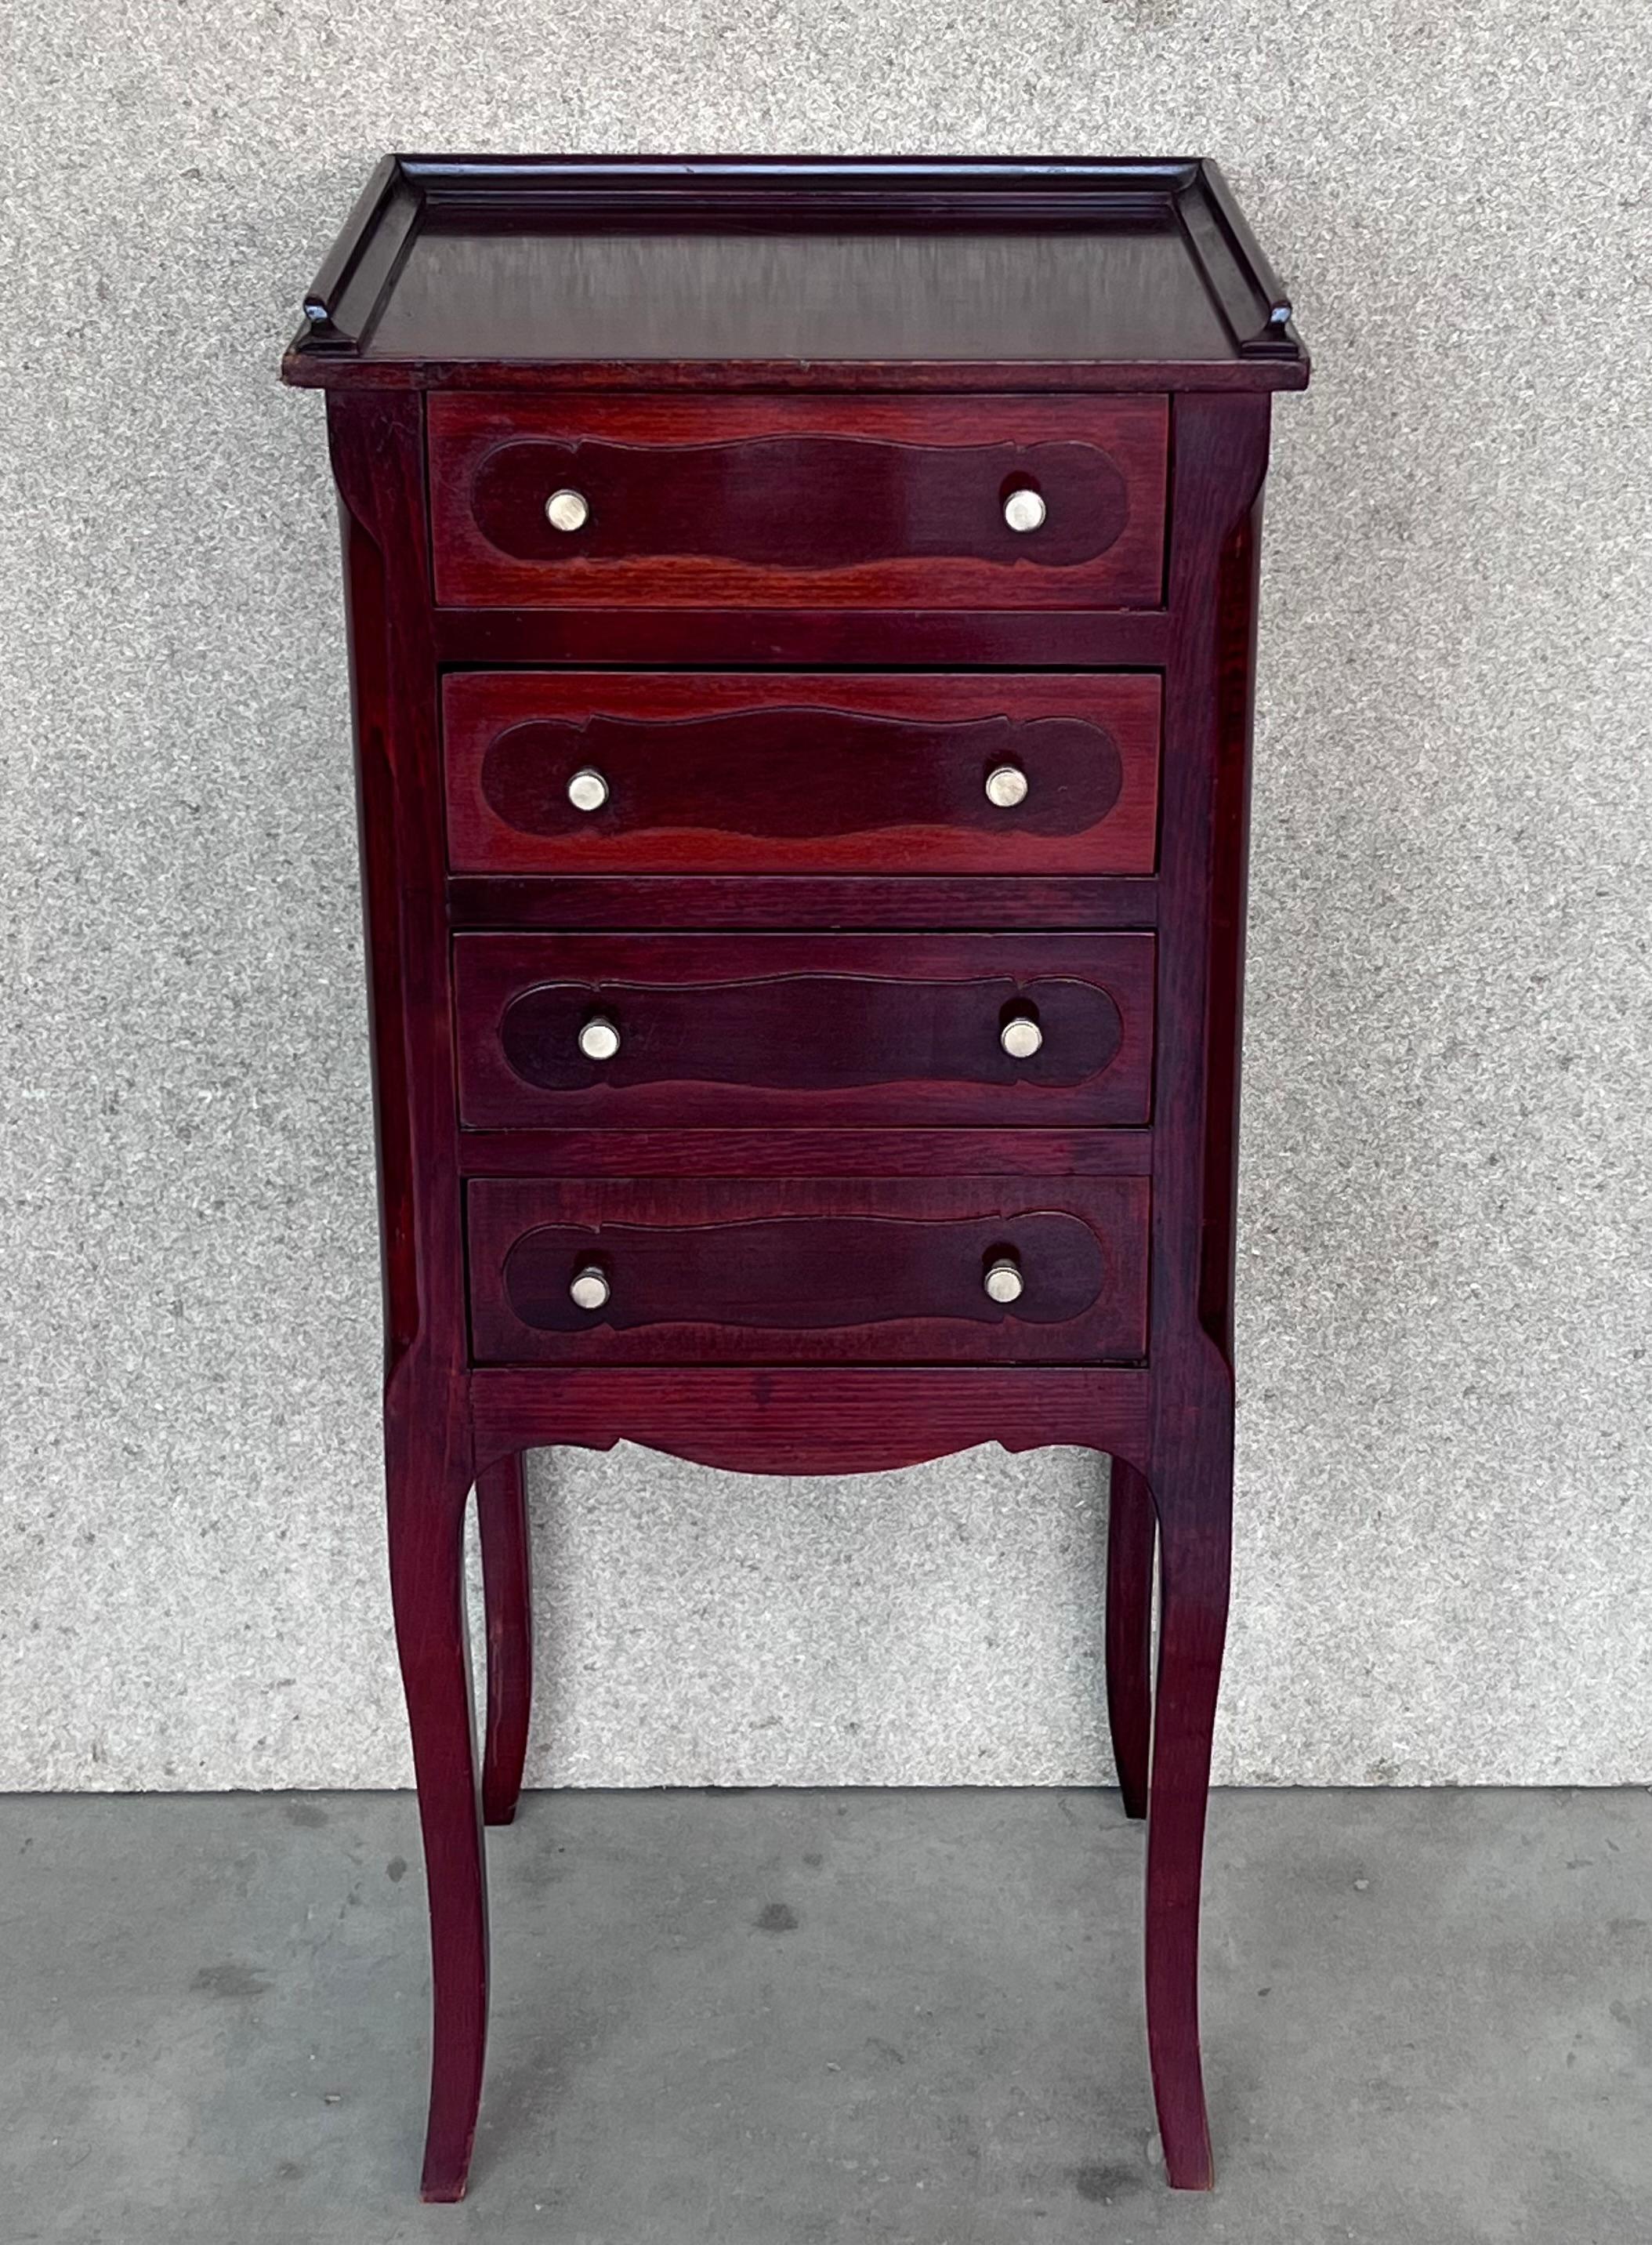 Italian Louis XV style mahogany pair of nightstand or end side tables with four drawers and cabriole legs
Rare and fine quality Italian Louis XV style, 1900s side tables or sofa tables with unusual measurements and four drawers. The tables has a